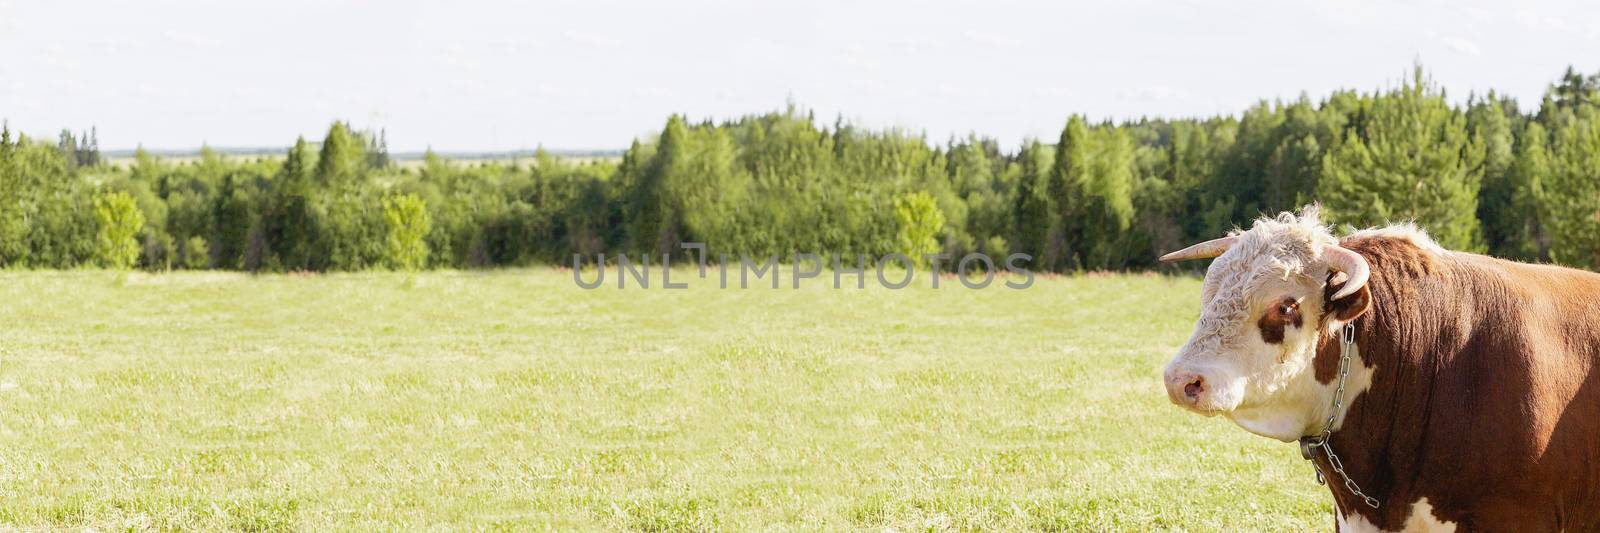 bull's head on the background of a green summer meadow and forest, banner, concept of dairy products. zodiac sign Taurus, Eastern horoscope bull, symbol of 2021, calendar, new year, Christmas.